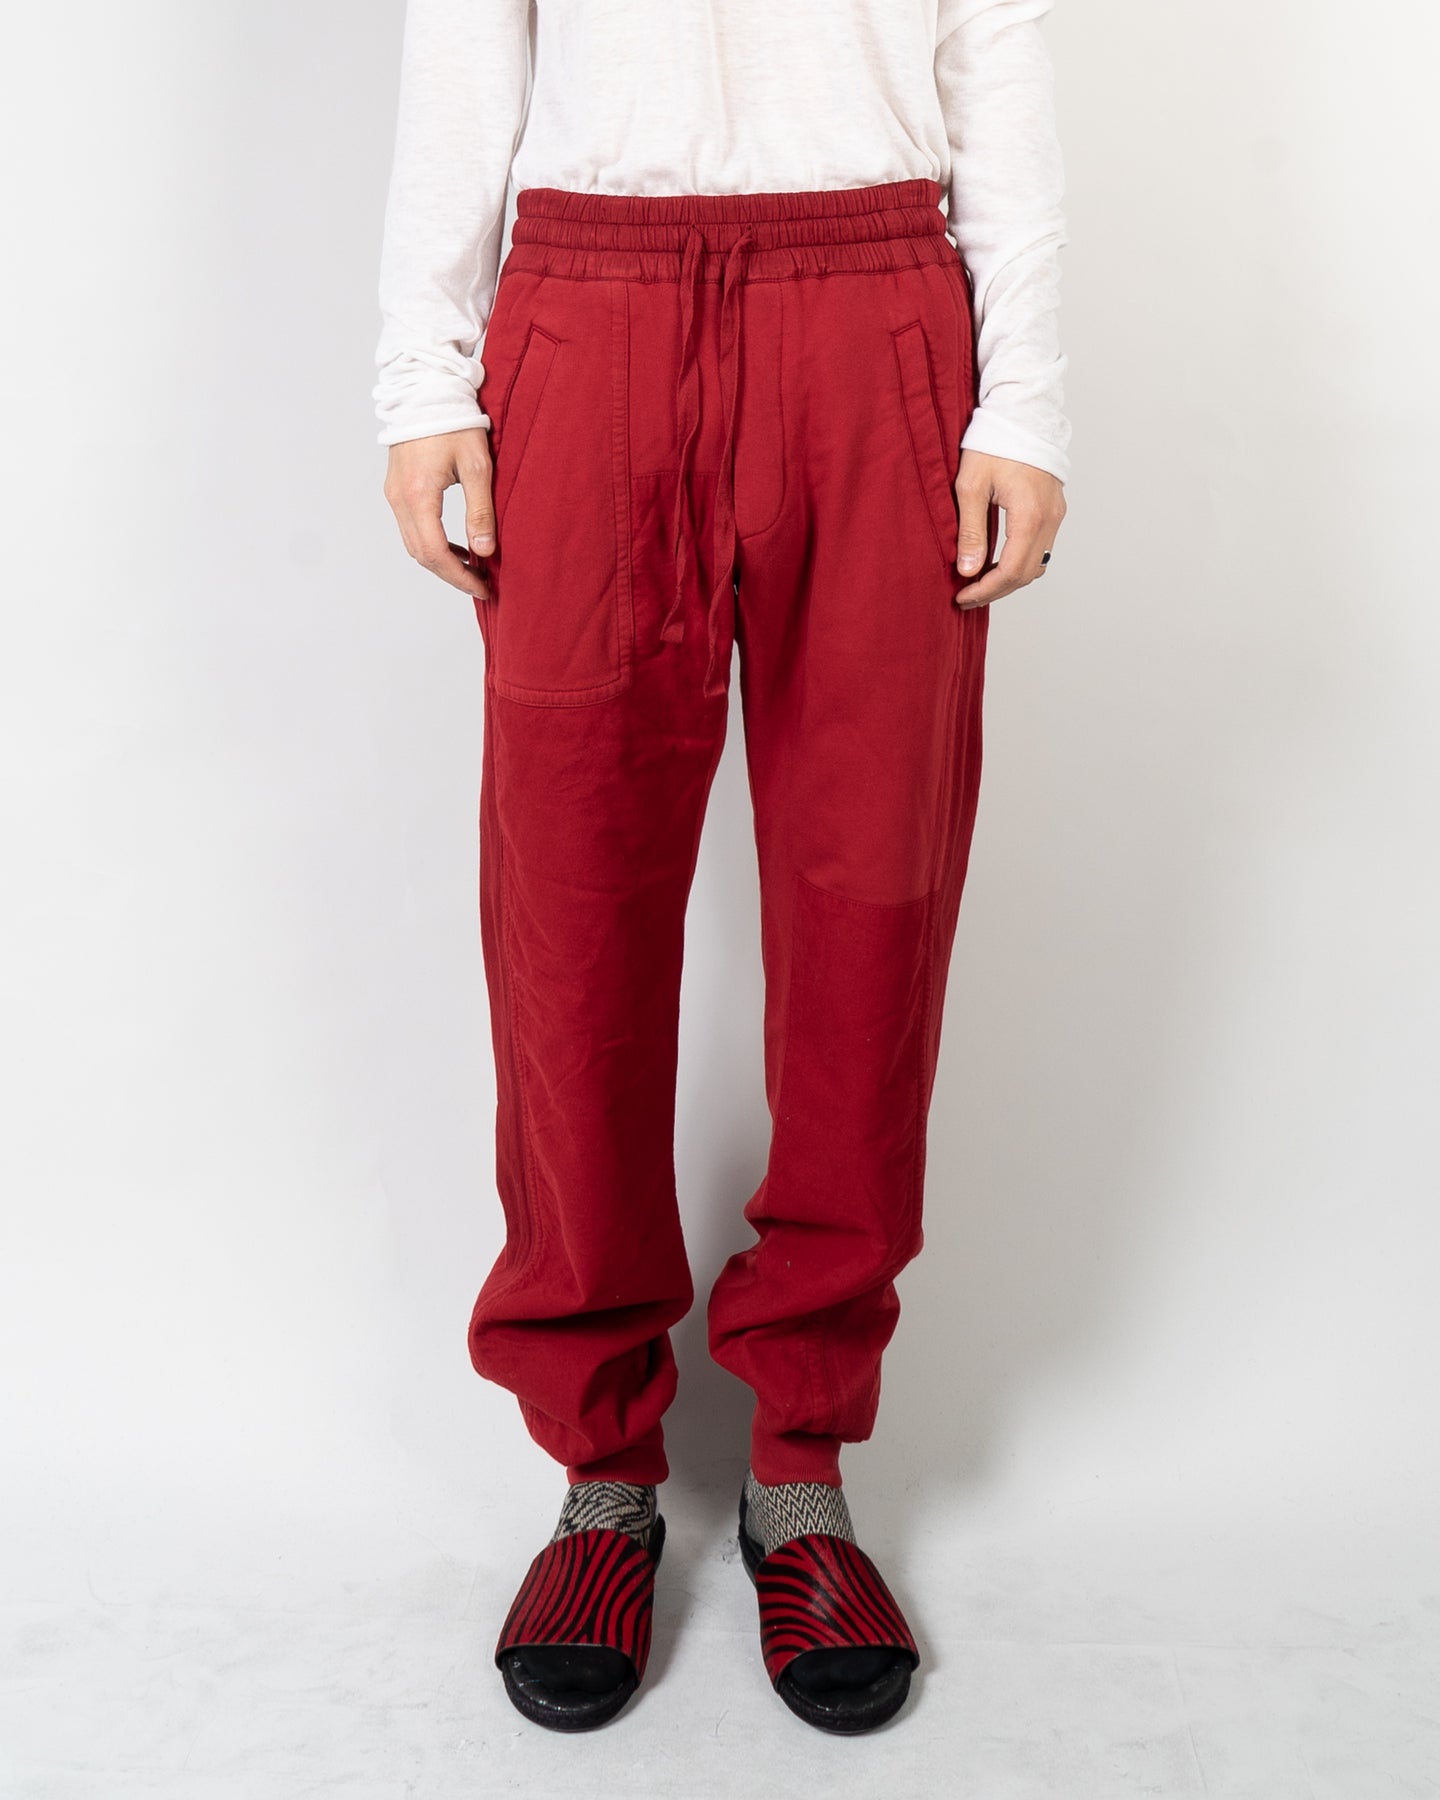 FW17 Relaxed Buthan Red Perth Sweatpants